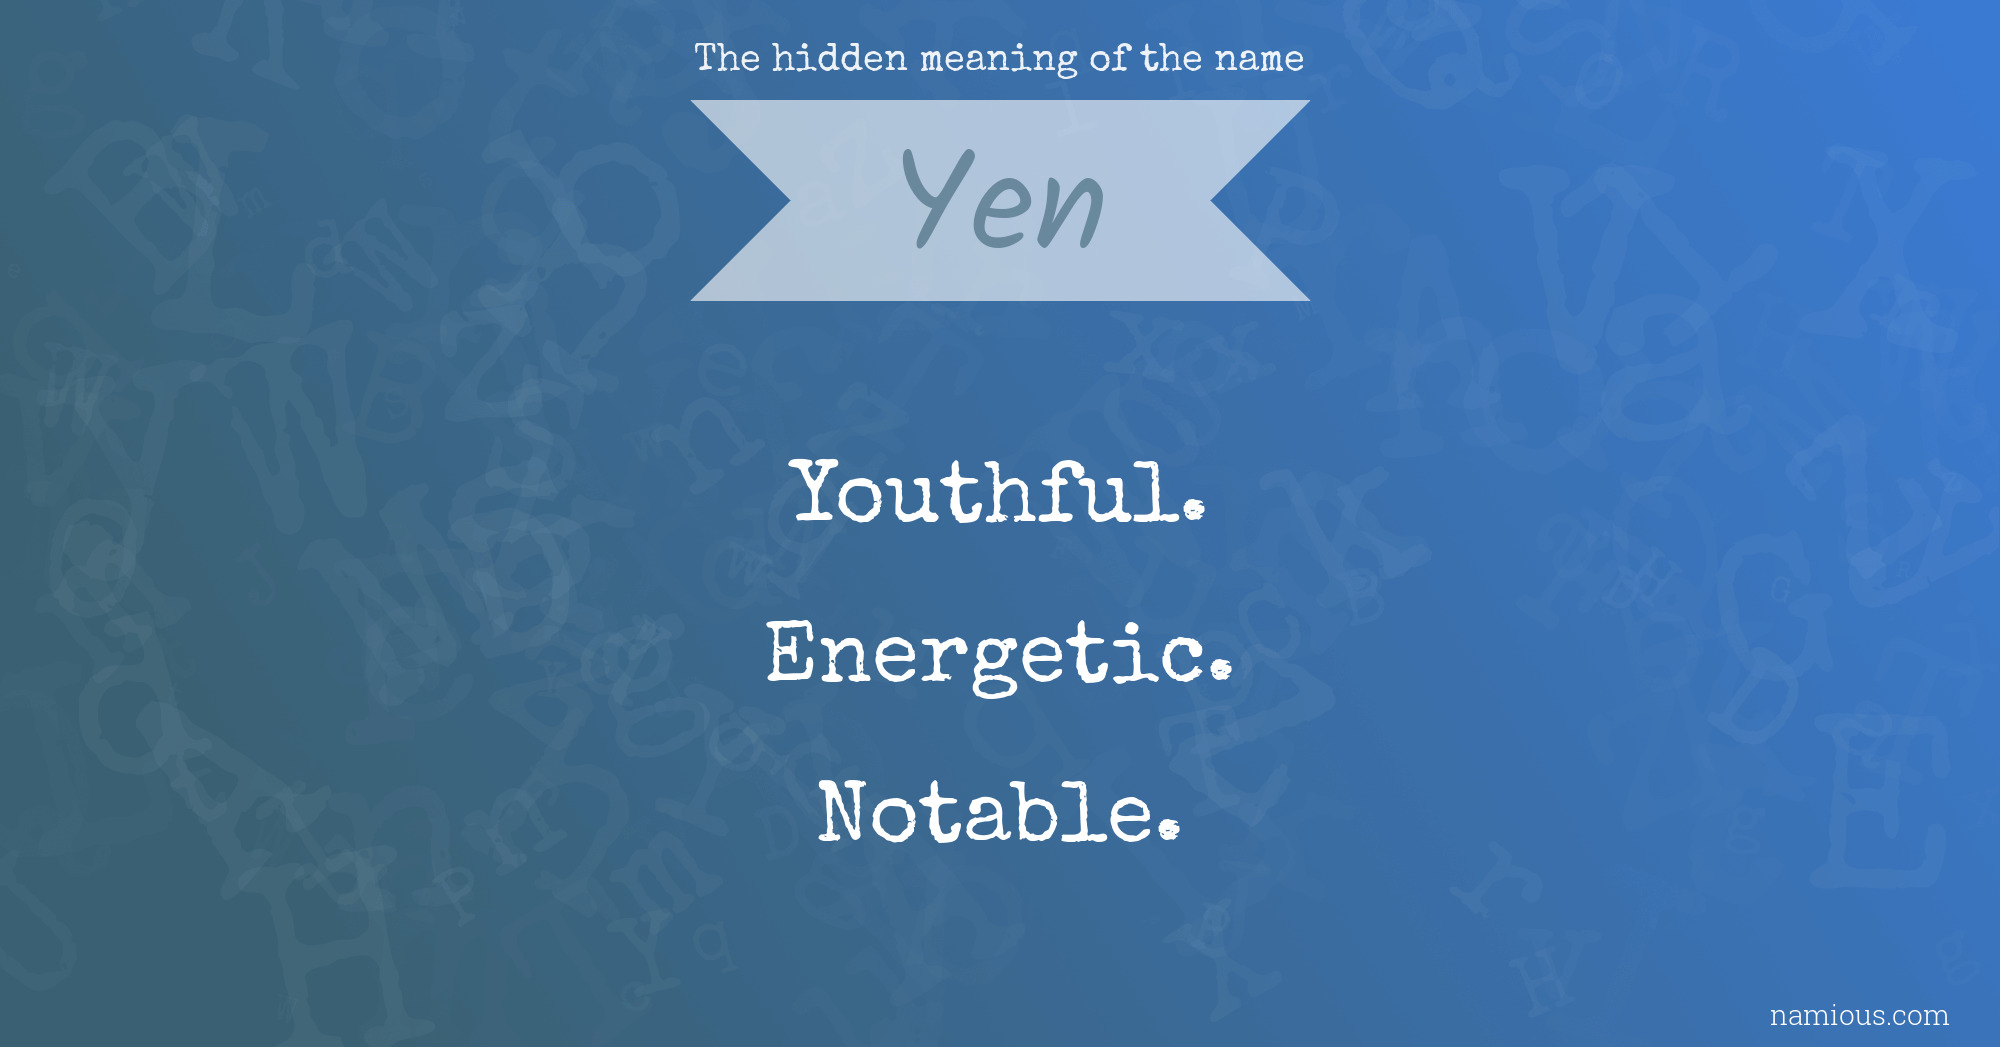 The hidden meaning of the name Yen